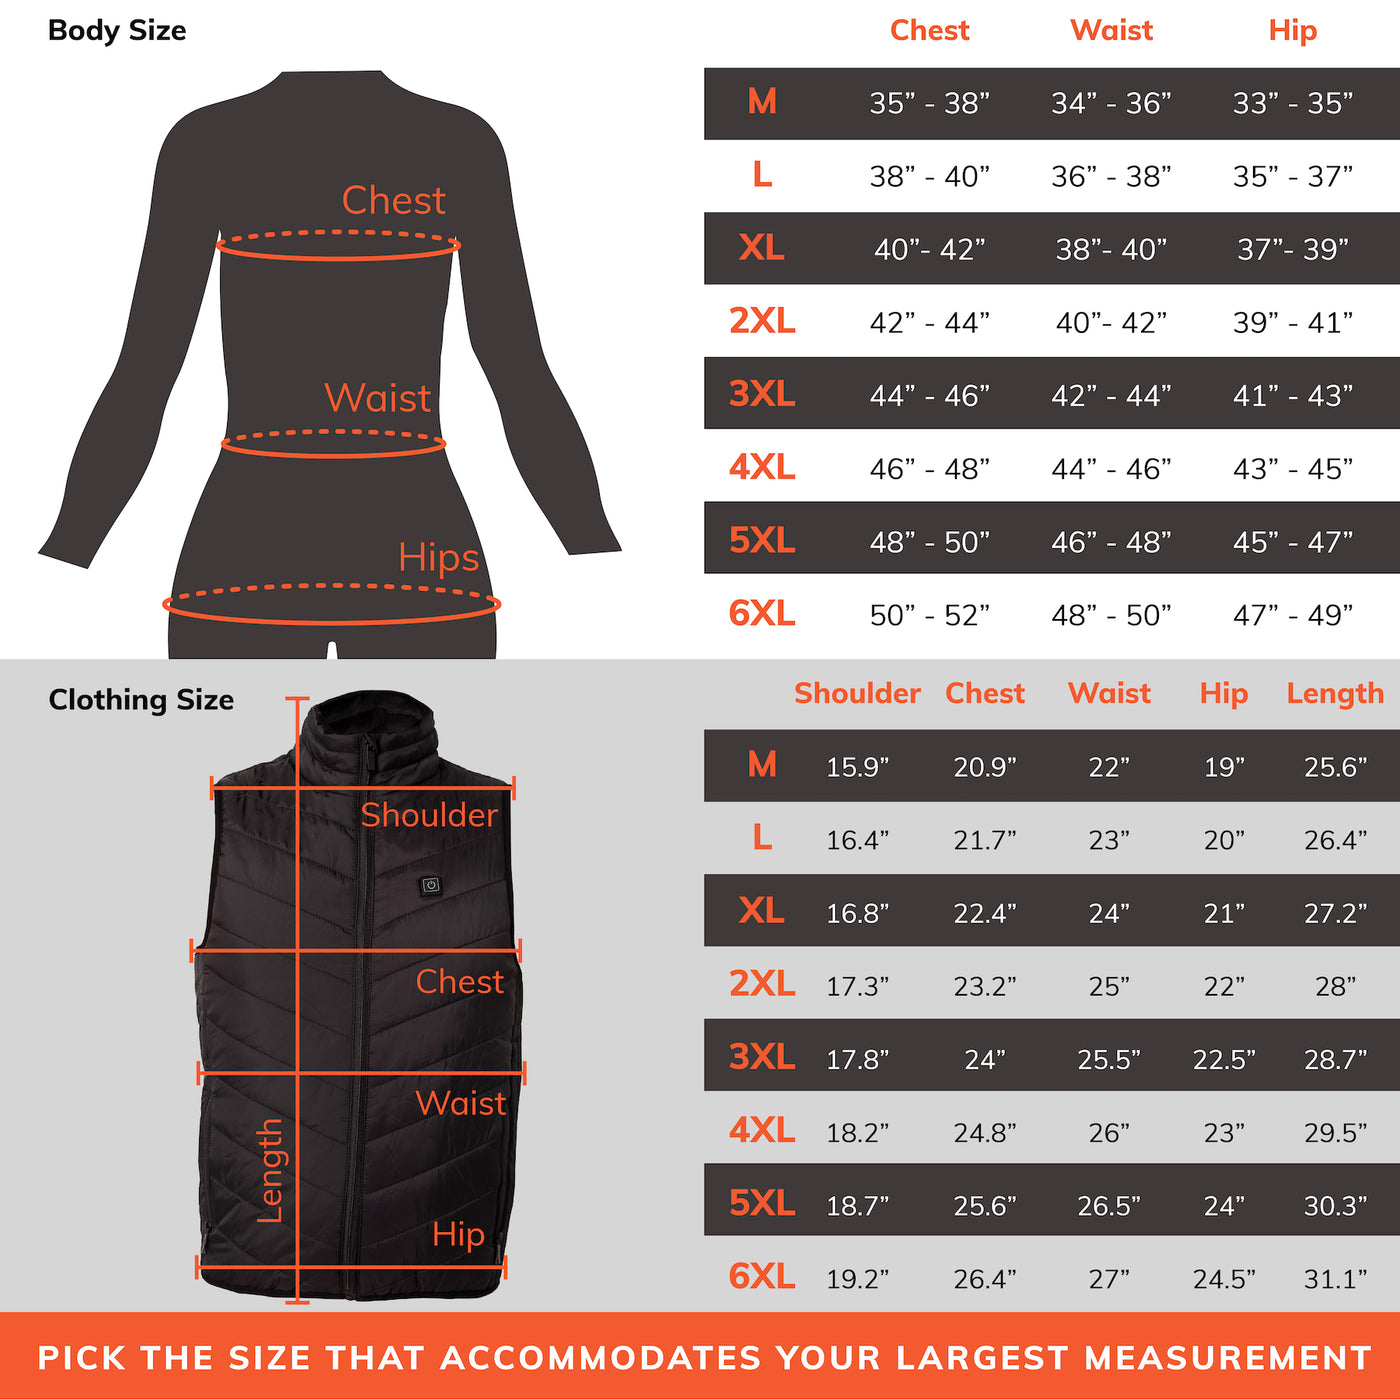 The sizing chart for our heated vest is size M through 6XL